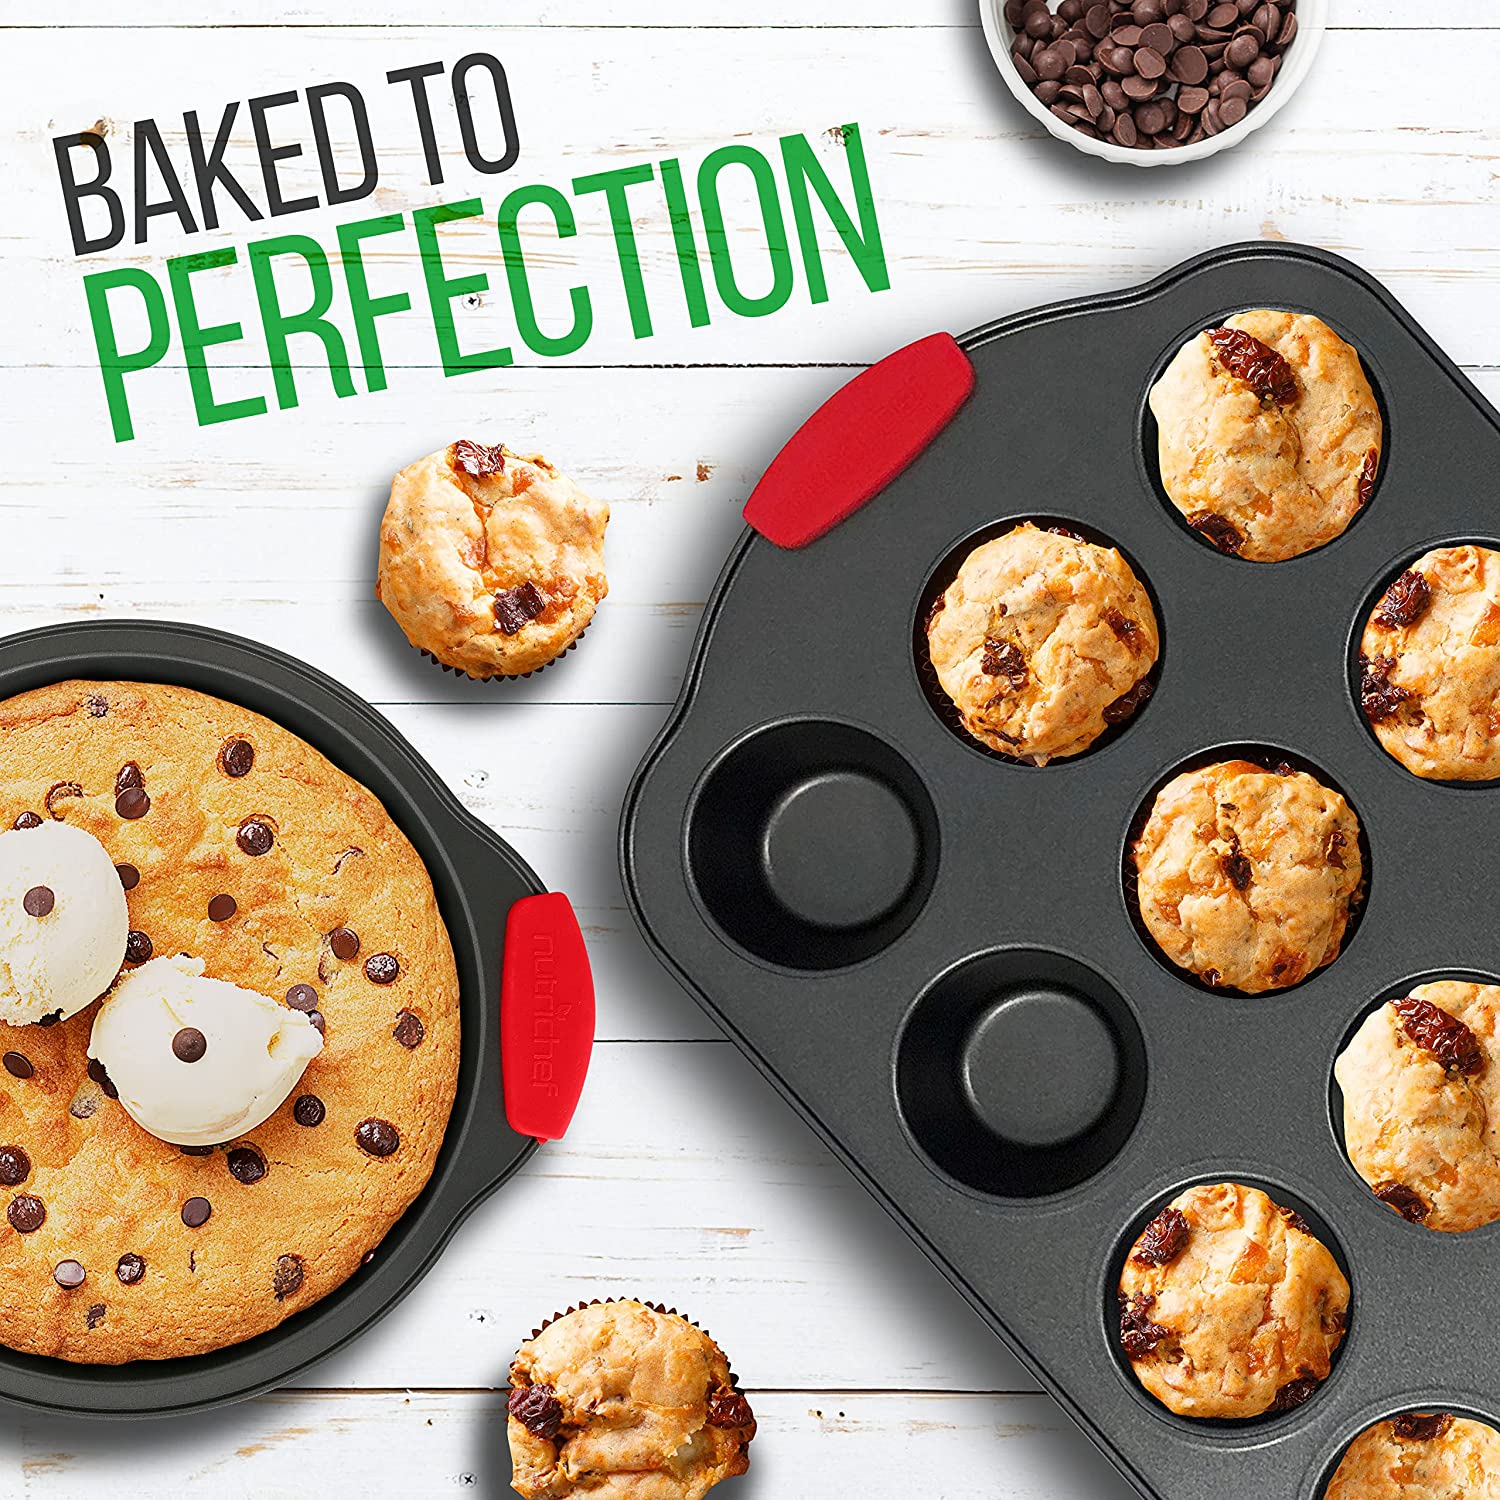 NutriChef 12-cup Ceramic Oven Muffin Pan, Non-Stick Coated Layer Surface